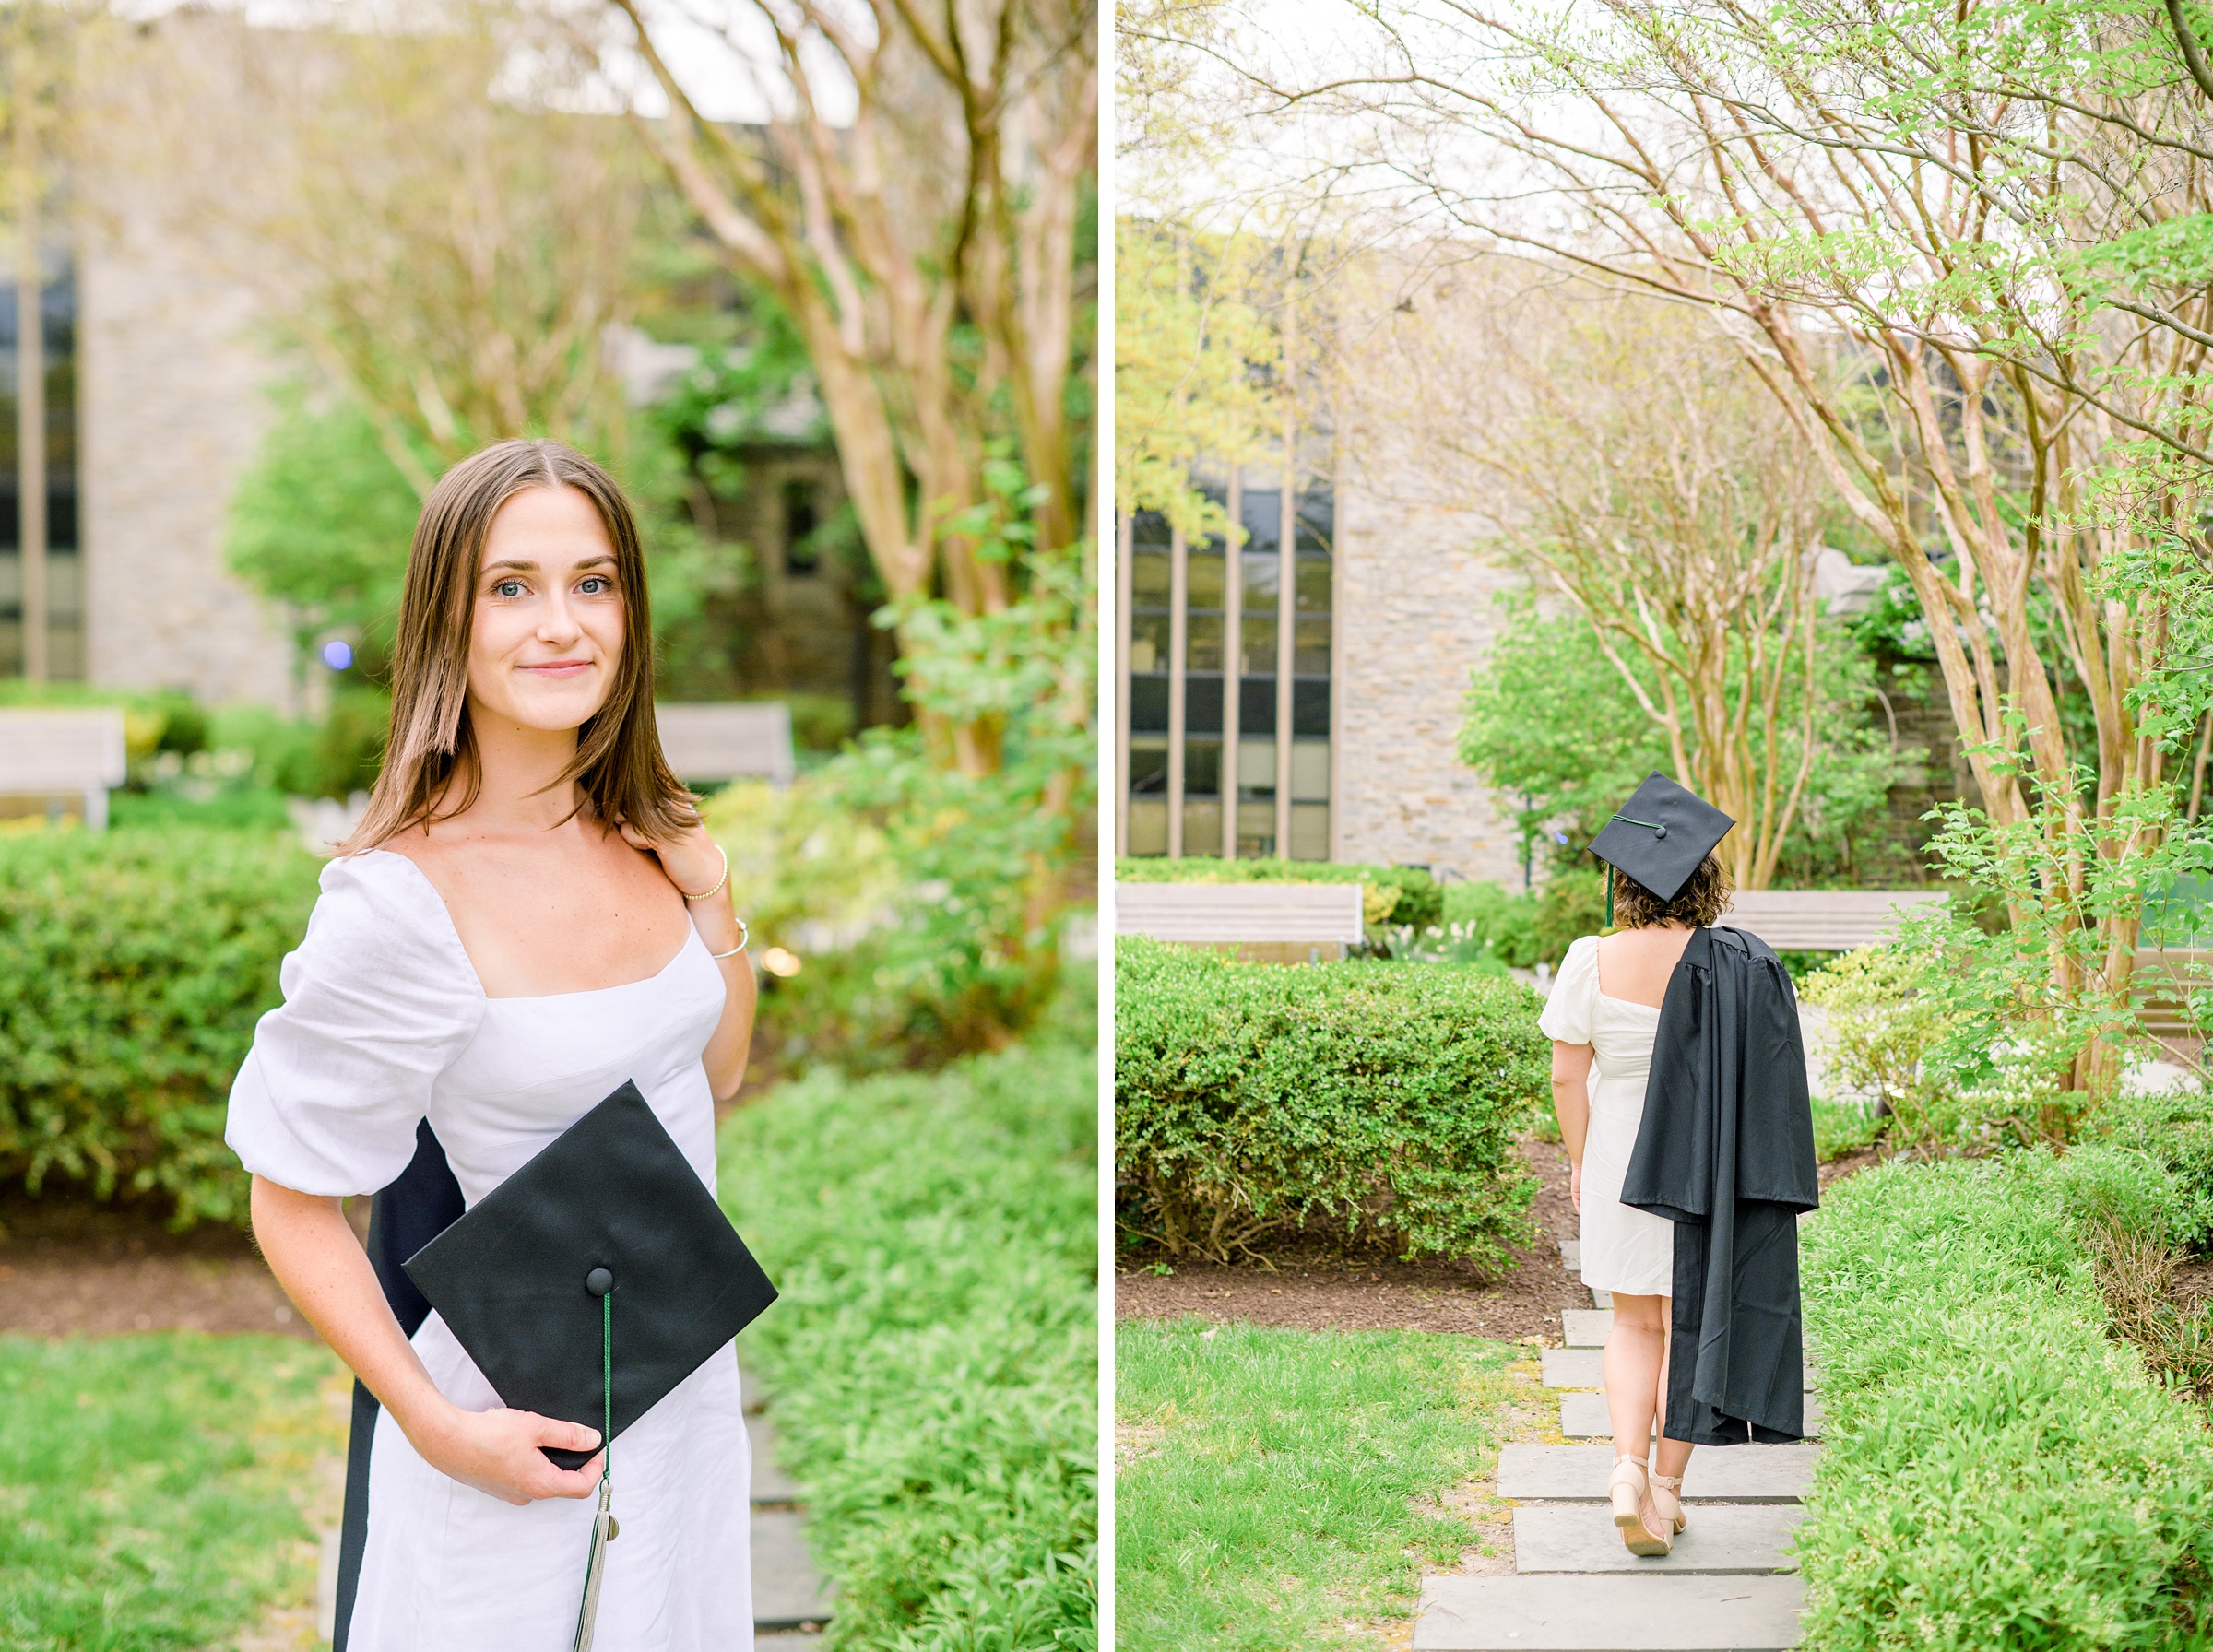 College Graduation Senior Session at Loyola University in Baltimore, Maryland. Photographed by Senior Portrait Photographer Cait Kramer Photography